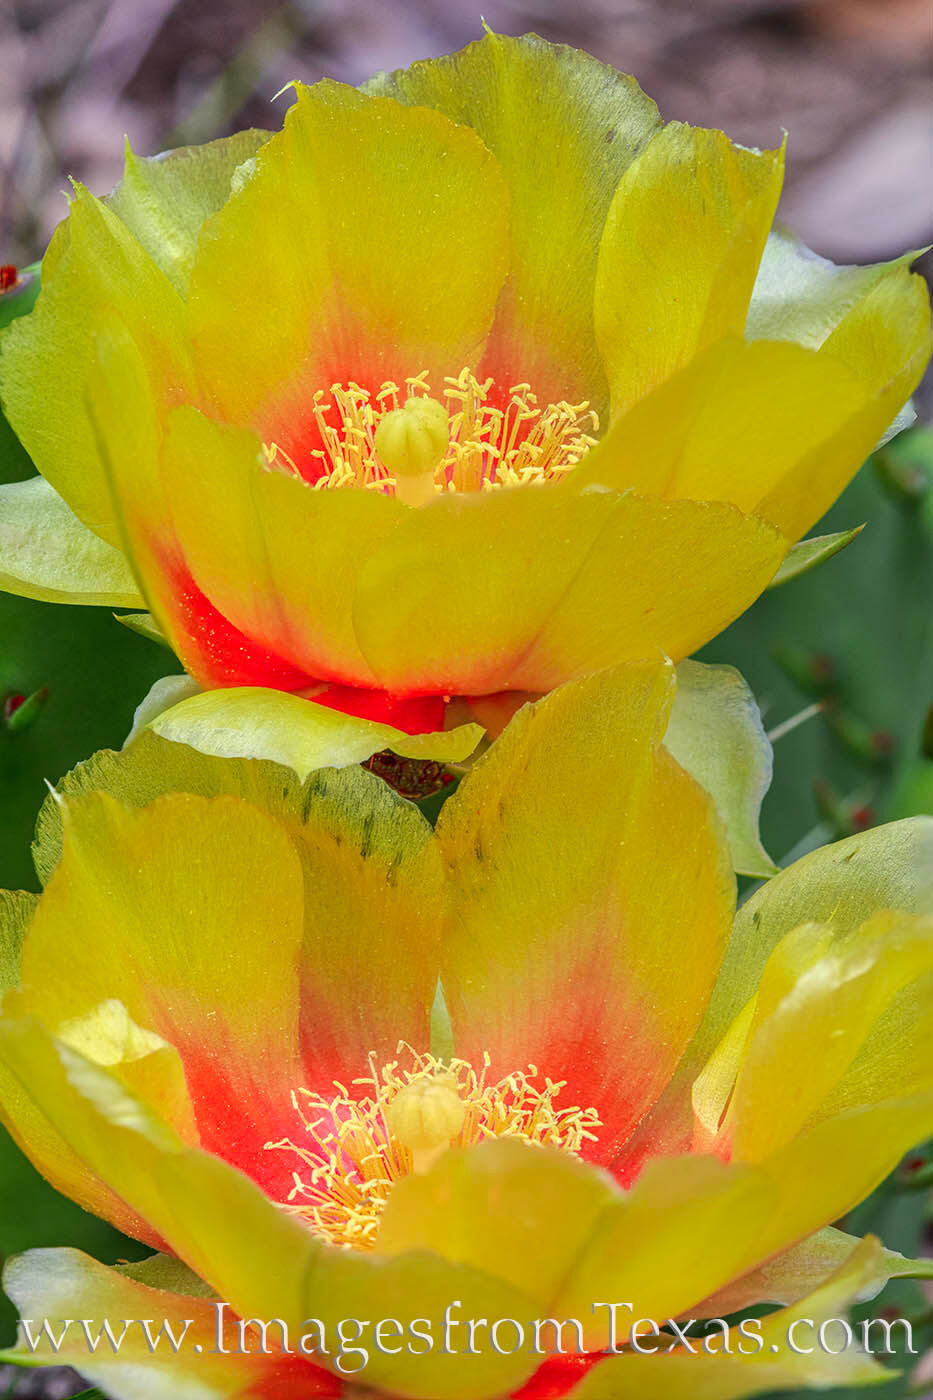 On a cool spring morning in late April, the golden blooms of prickly pear cacti begin to appear in the Texas Hill Country.